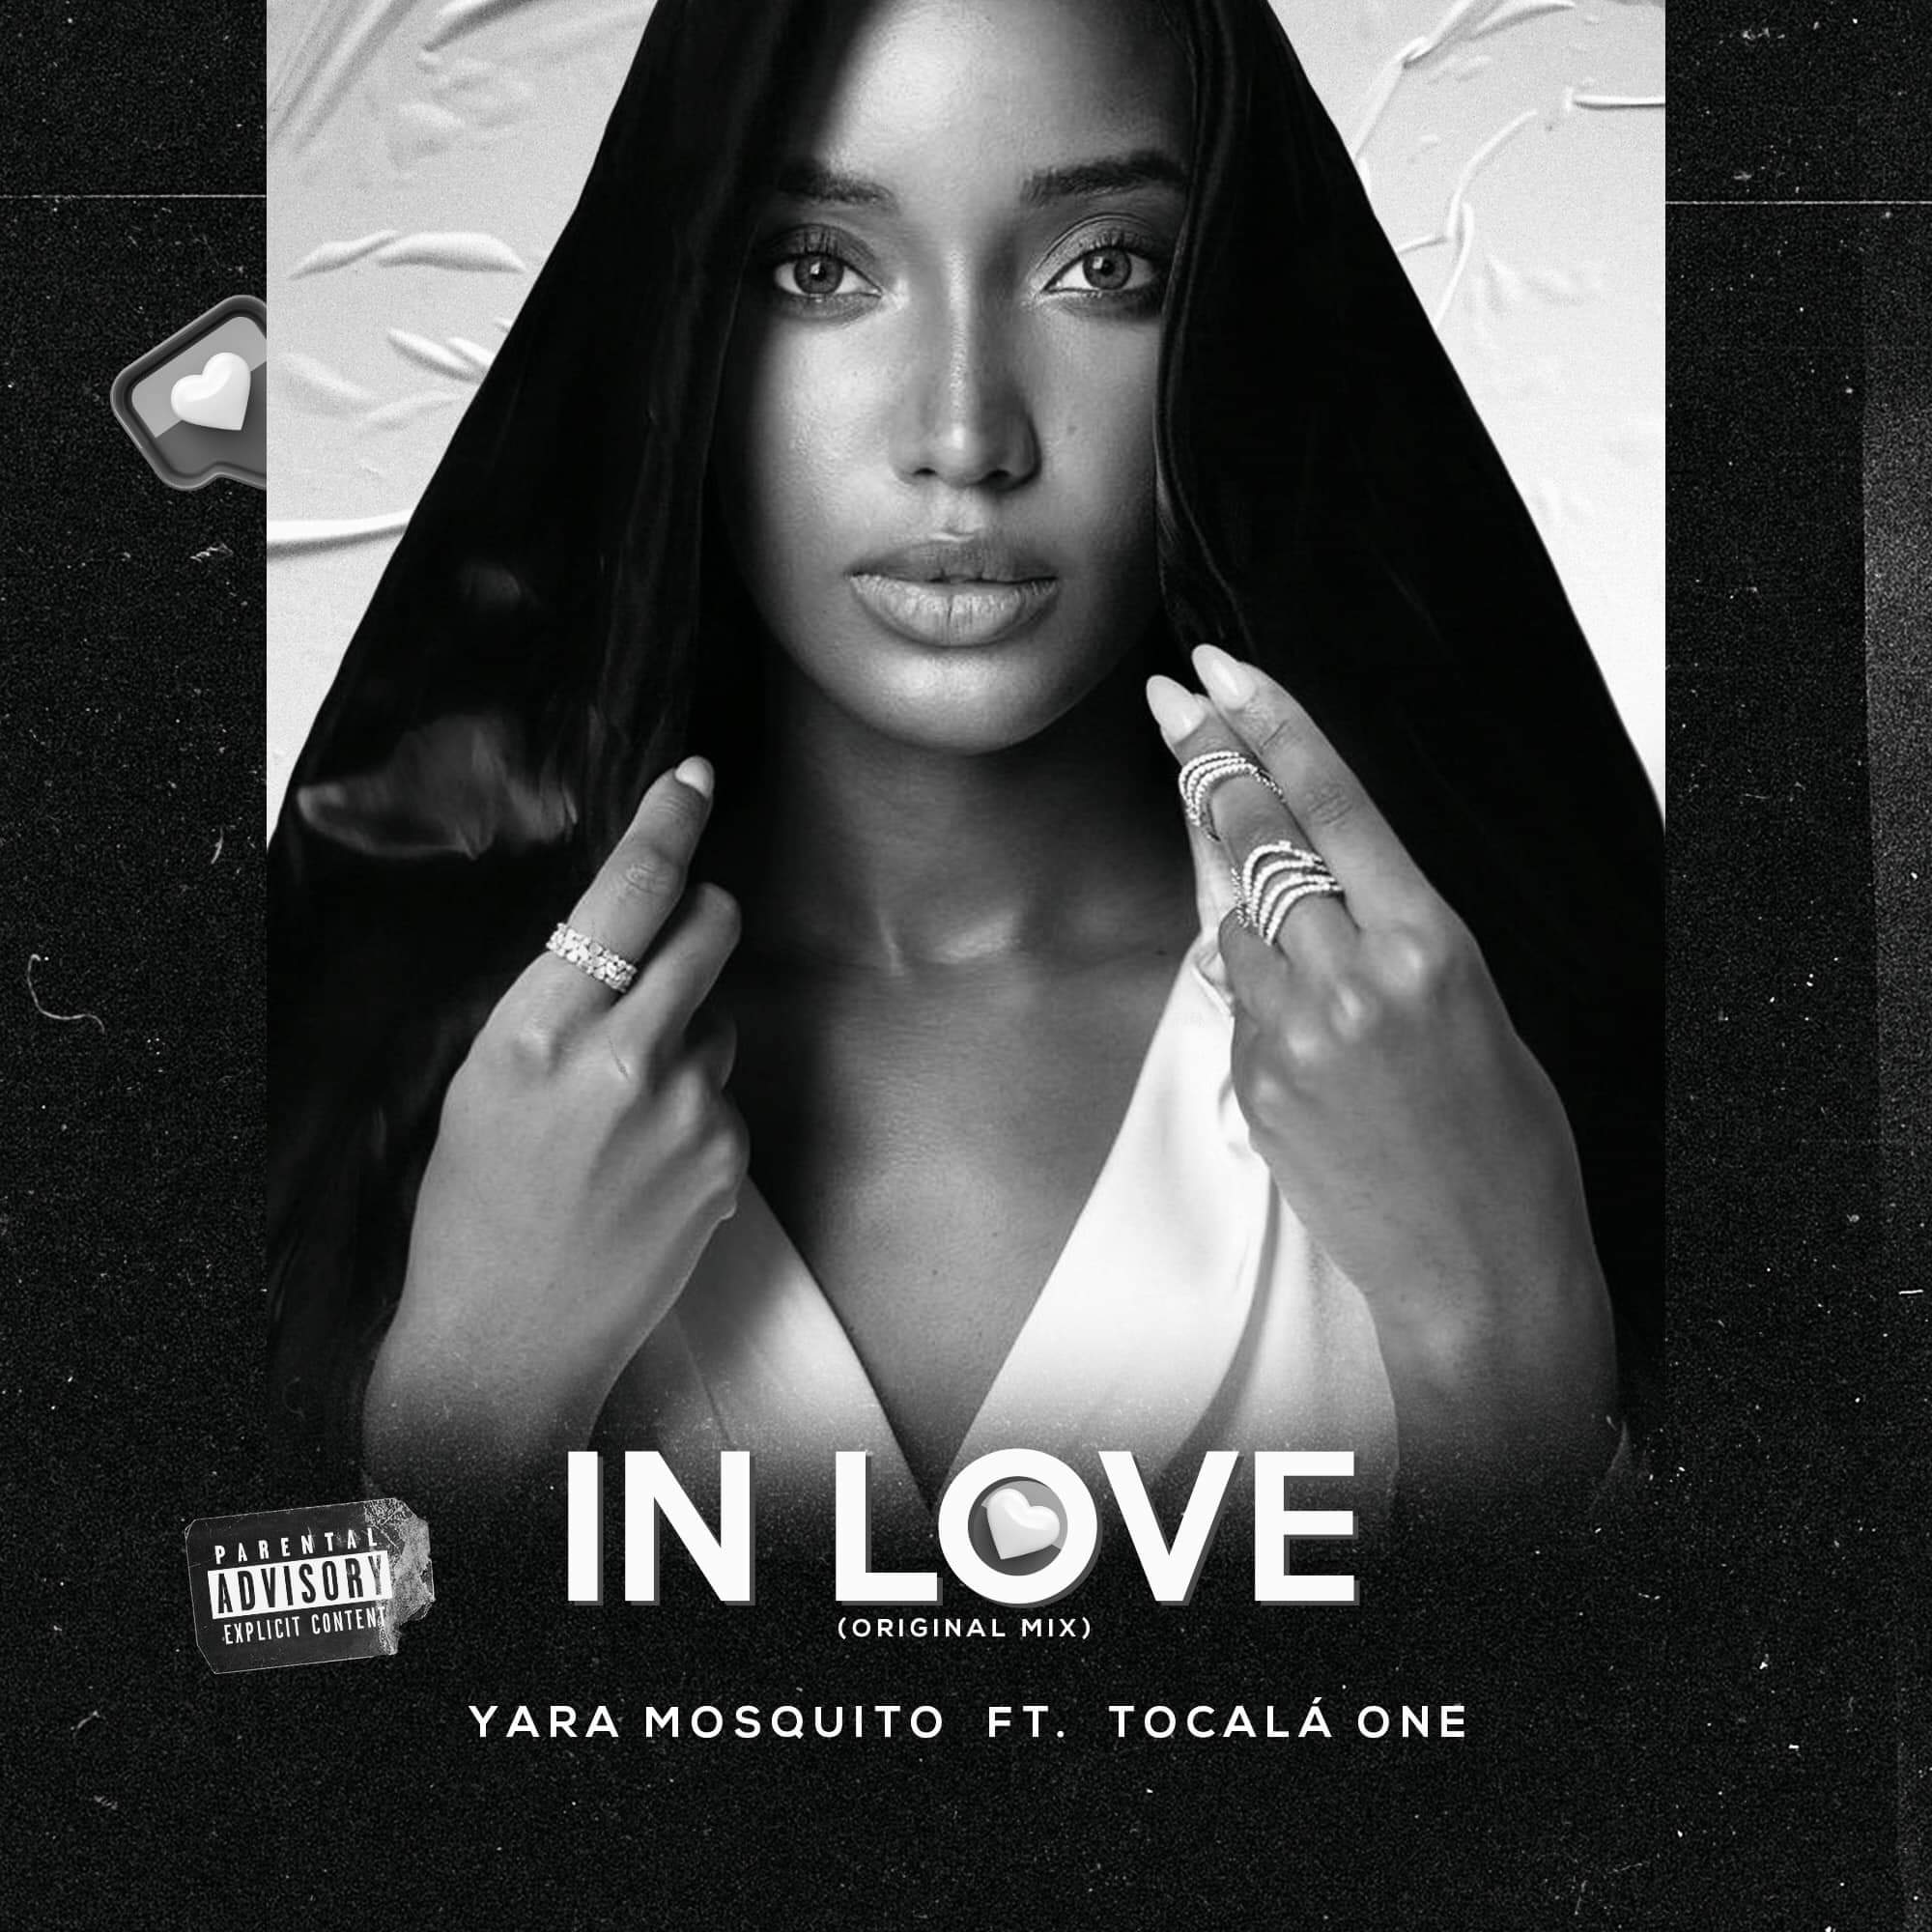 Yara Mosquito feat. Dj Tocala One - In Love